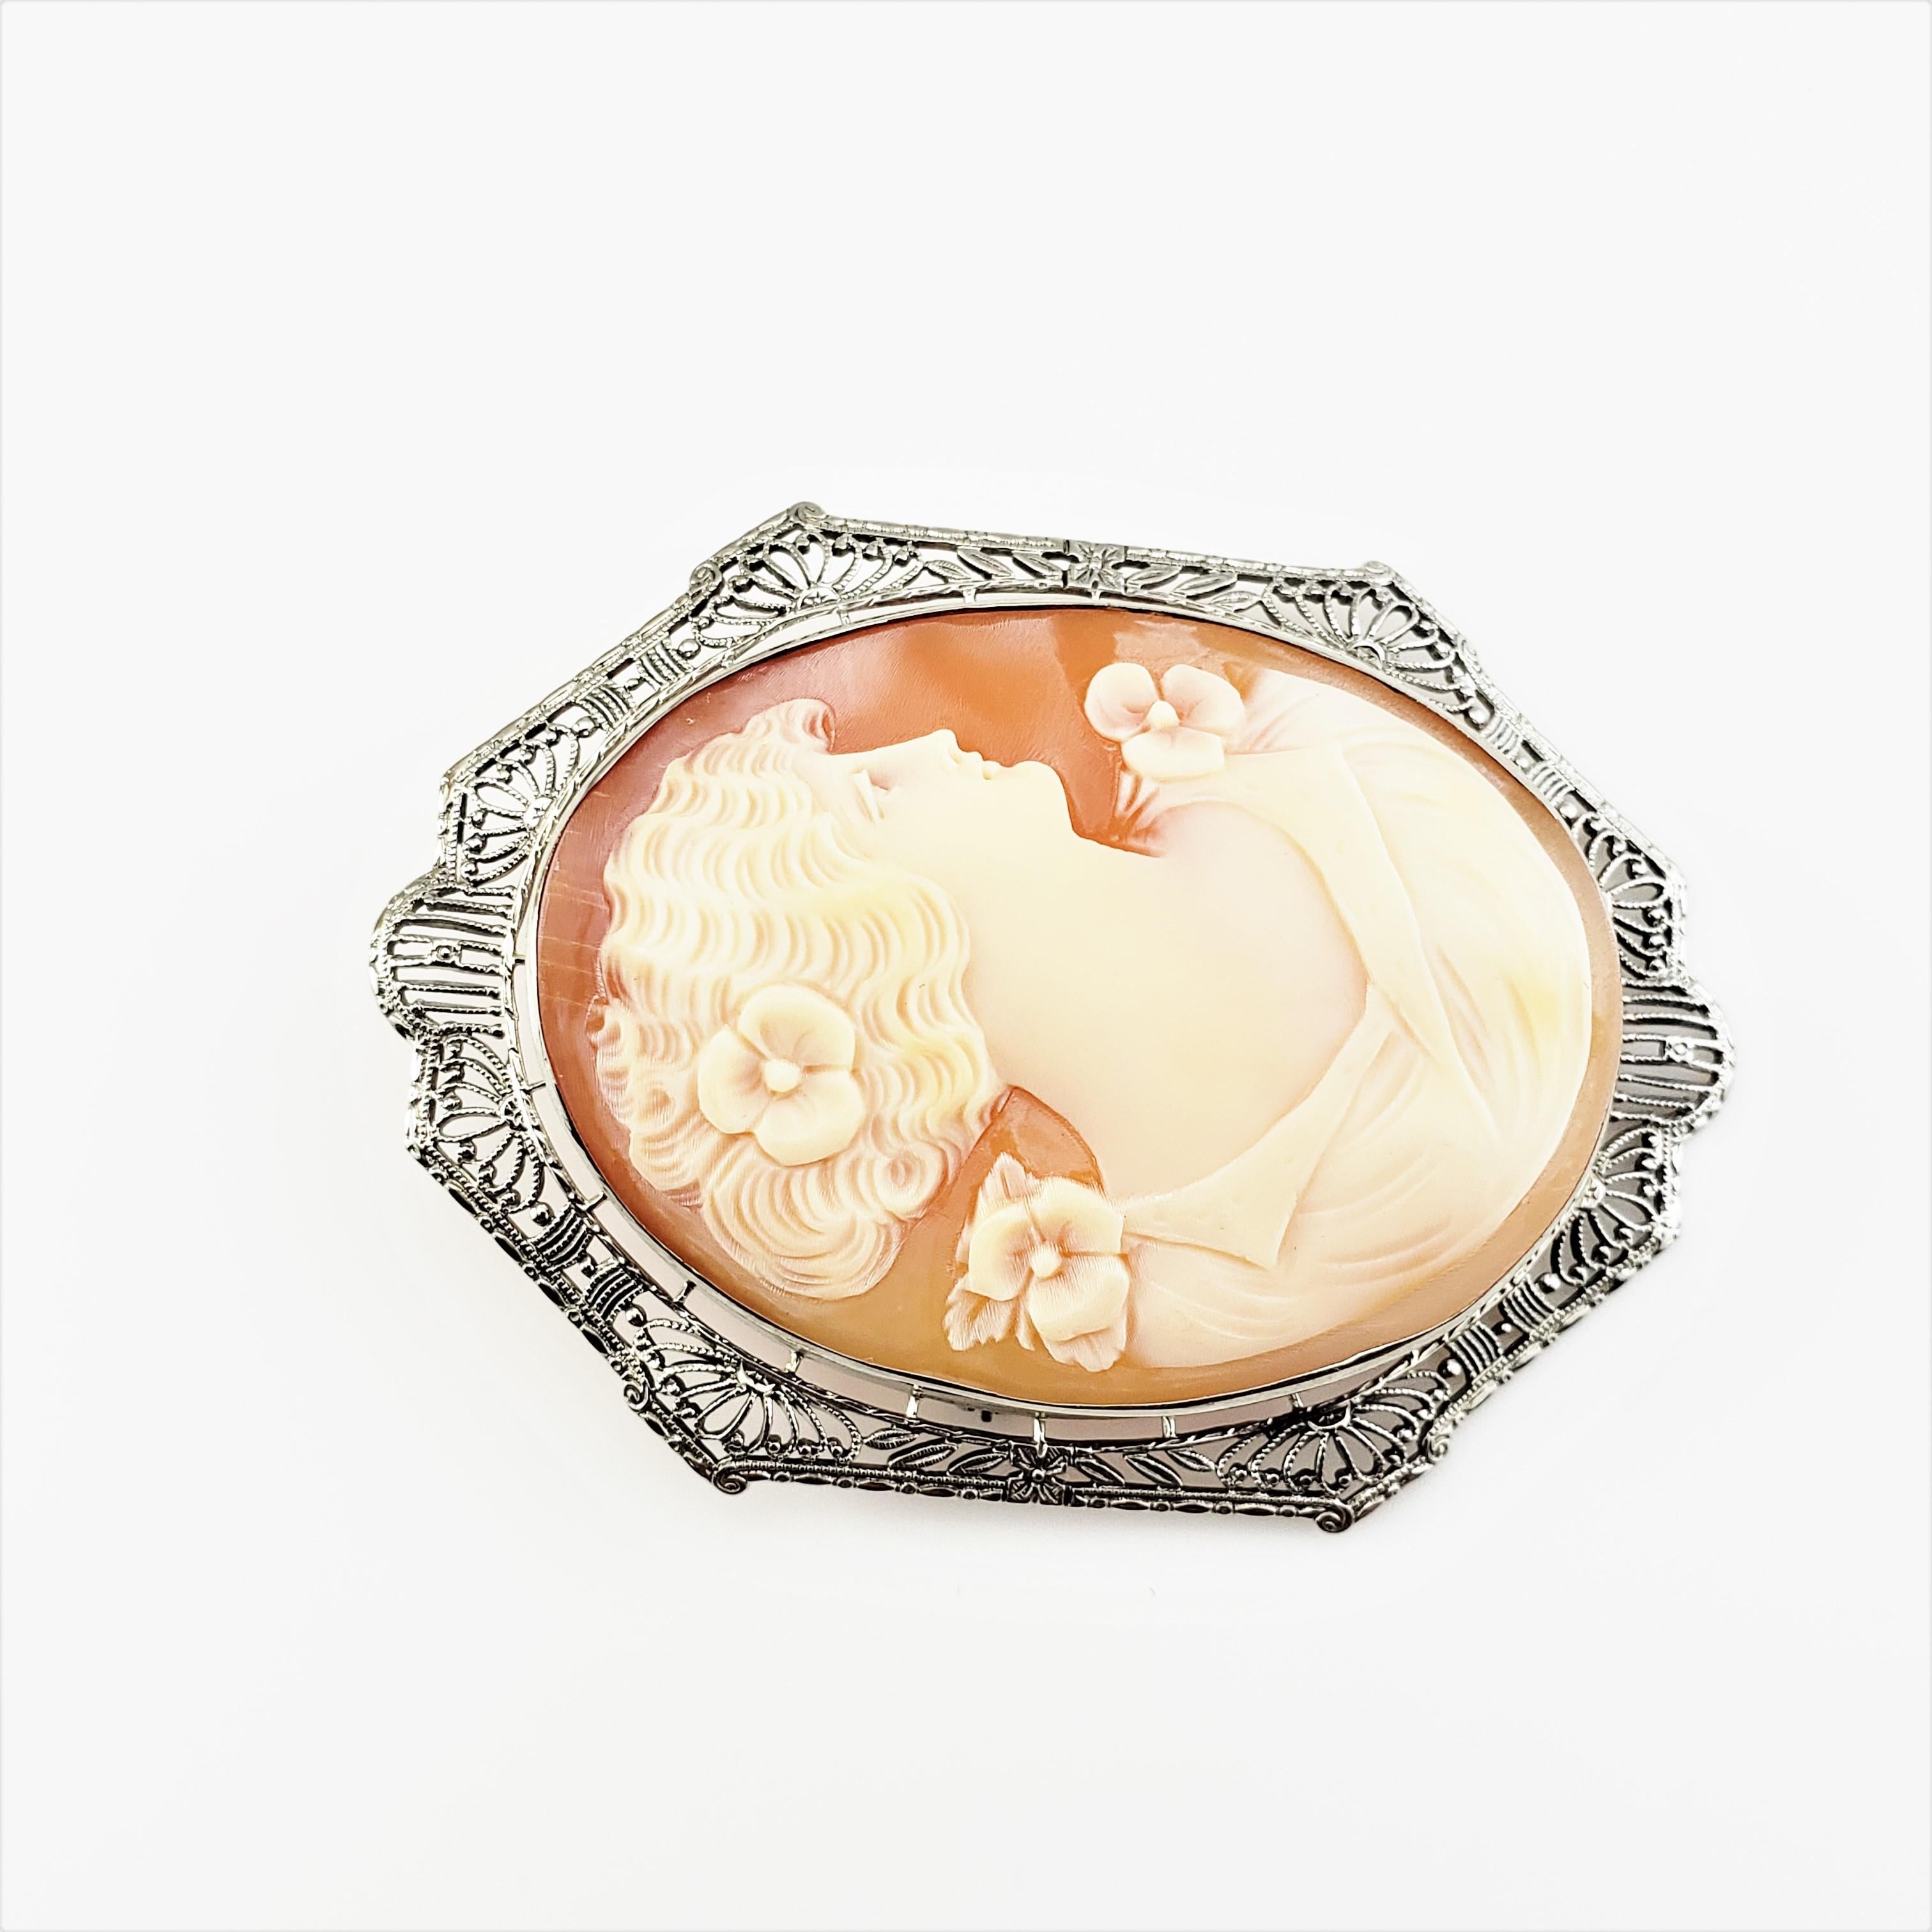 14 Karat White Gold Filigree Cameo Brooch/Pendant-

This elegant cameo features a lovely lady in profile framed in exquisitely detailed 14K white gold filigree.  Can be worn as a brooch or a pendant.

Size:  52 mm x  37 mm

Weight:  8.8 dwt. /  13.7